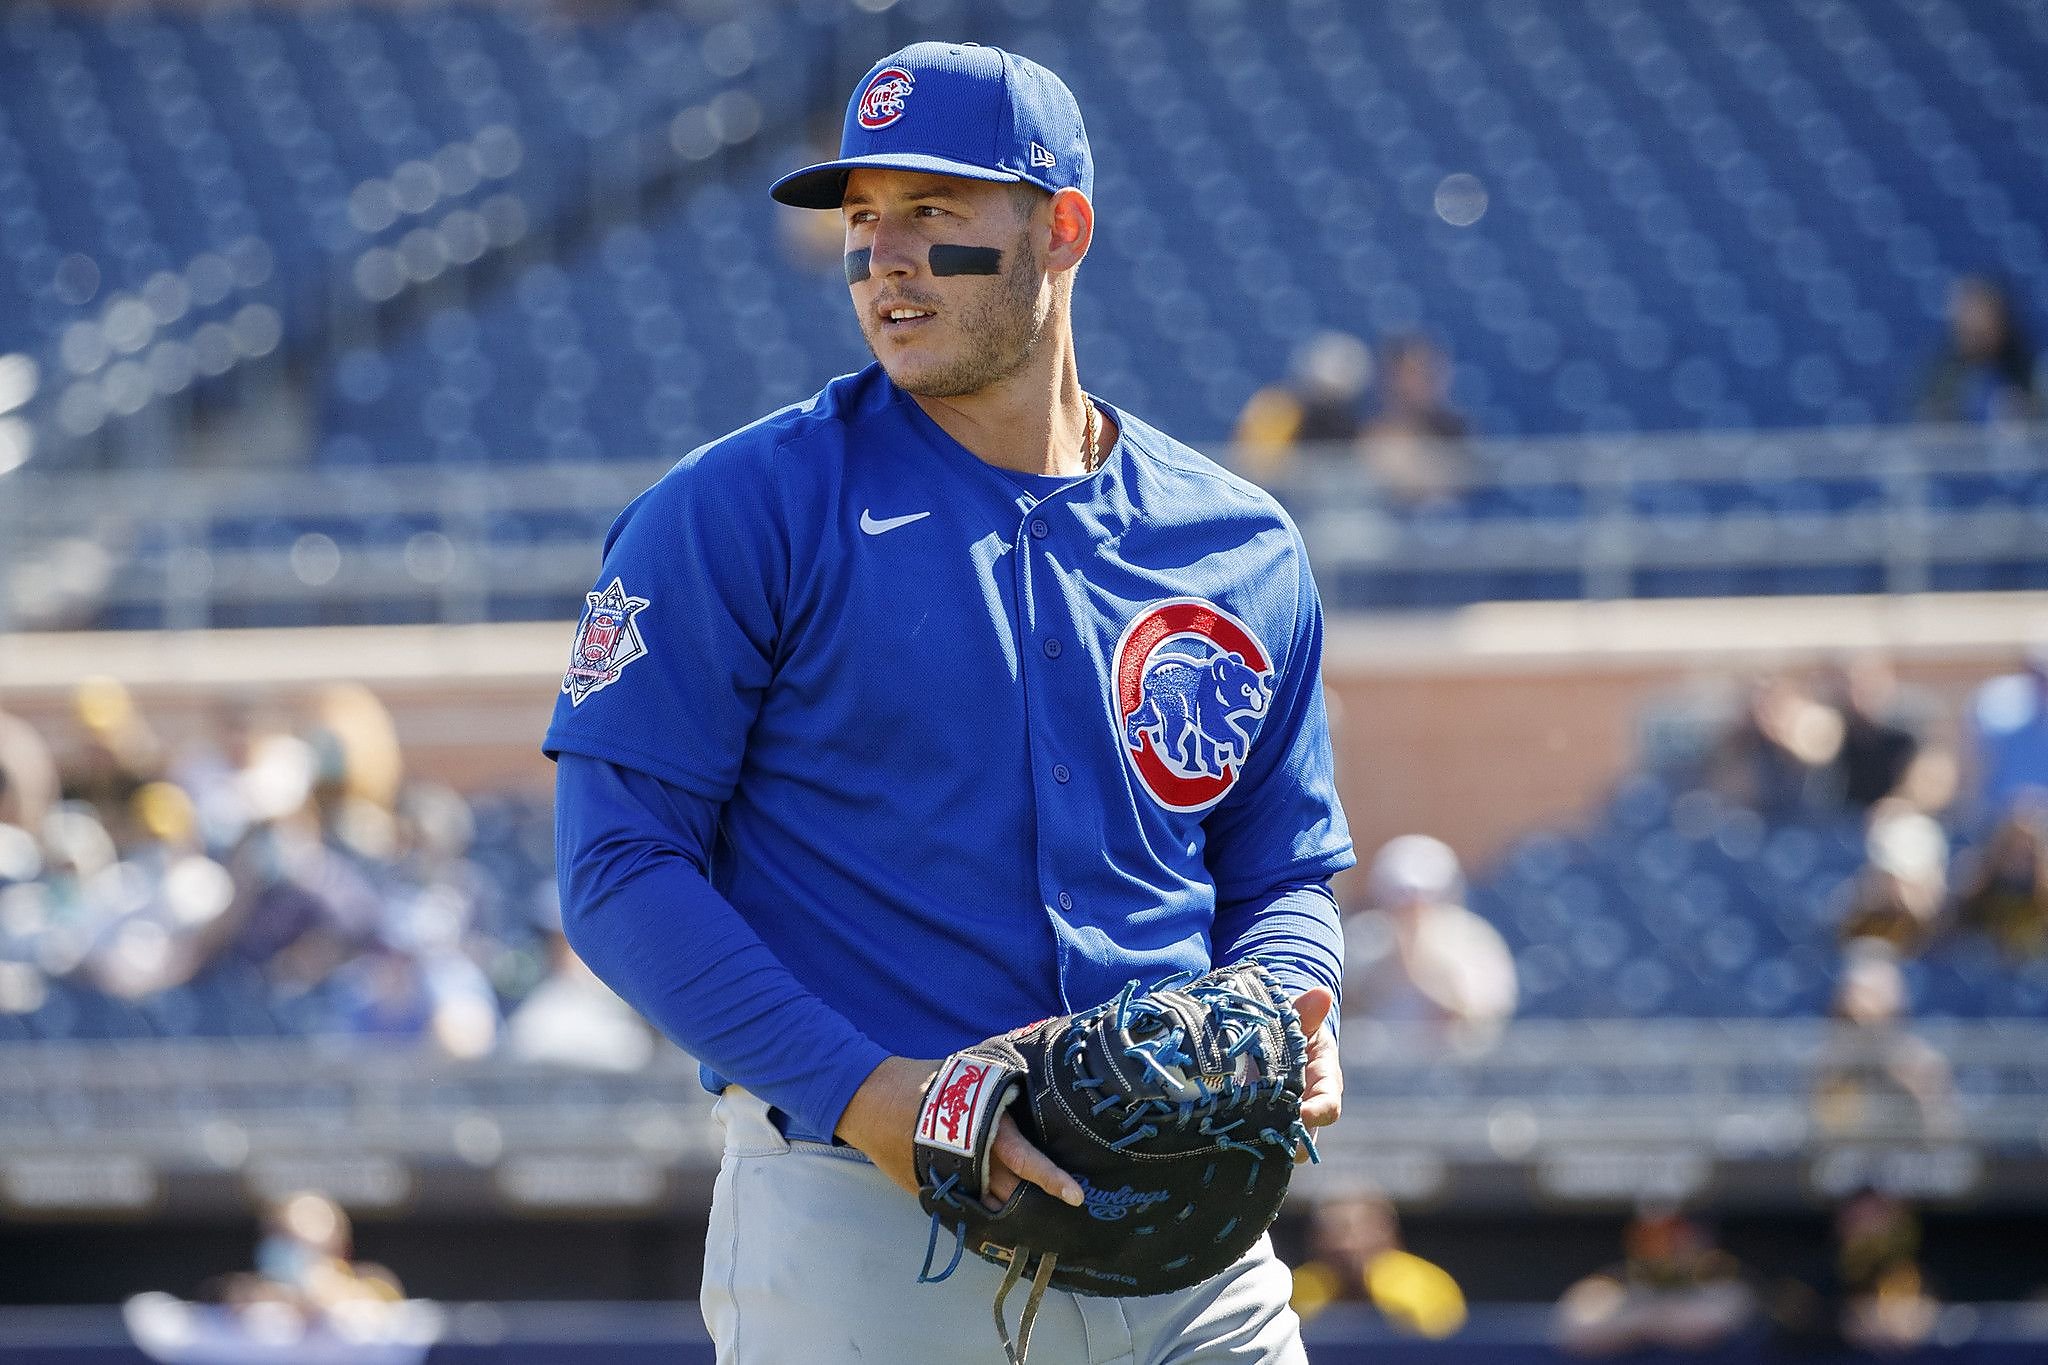 Cubs' Anthony Rizzo: 'We play too much baseball